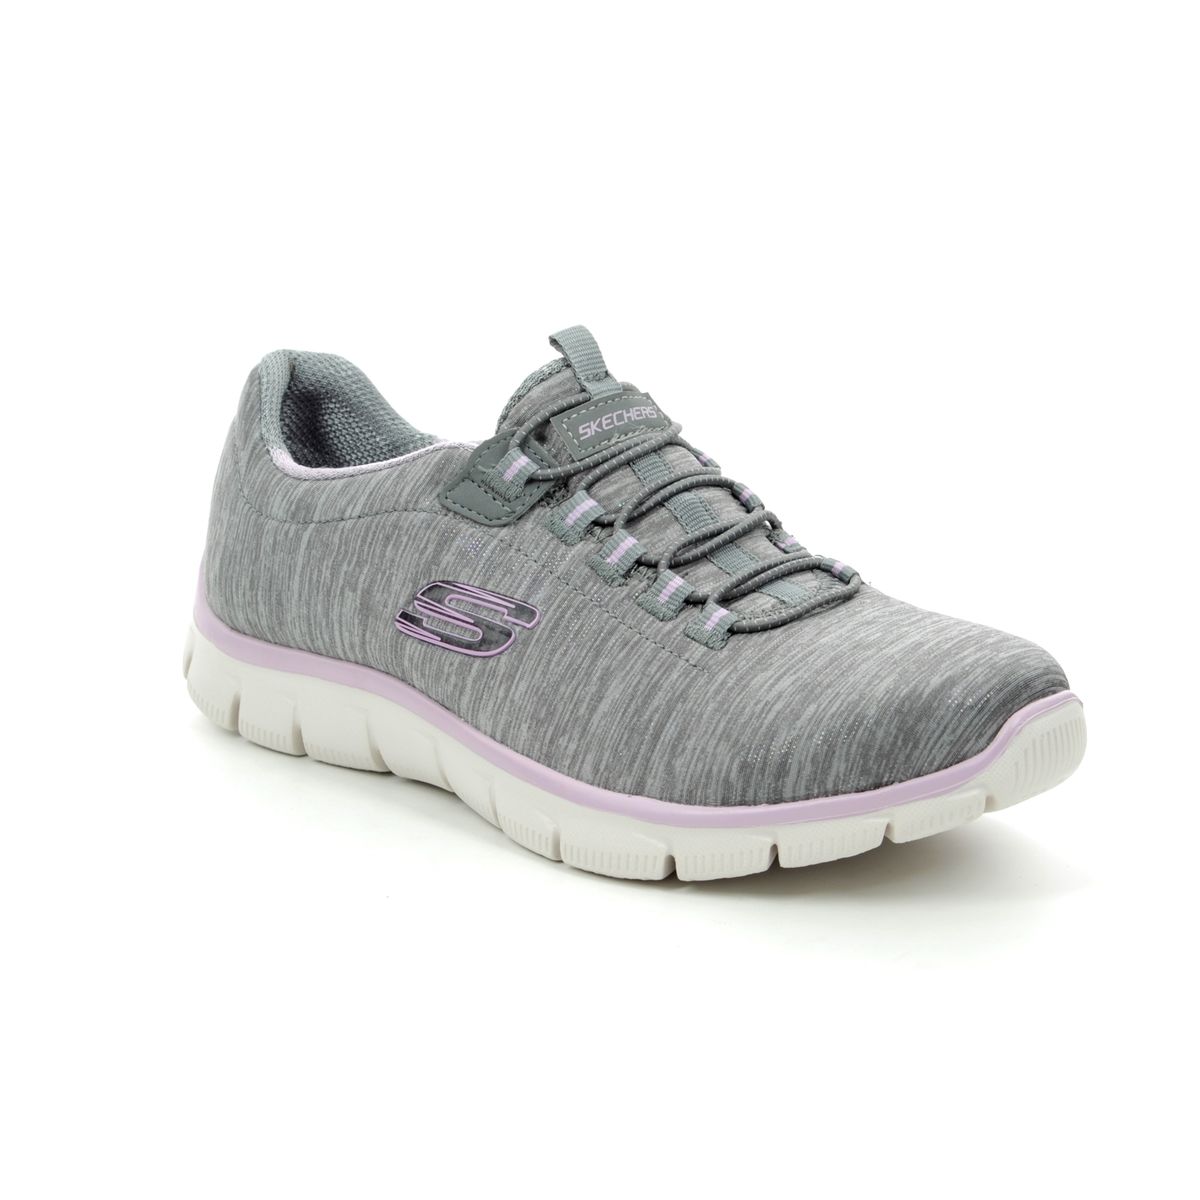 skechers trainer shoes